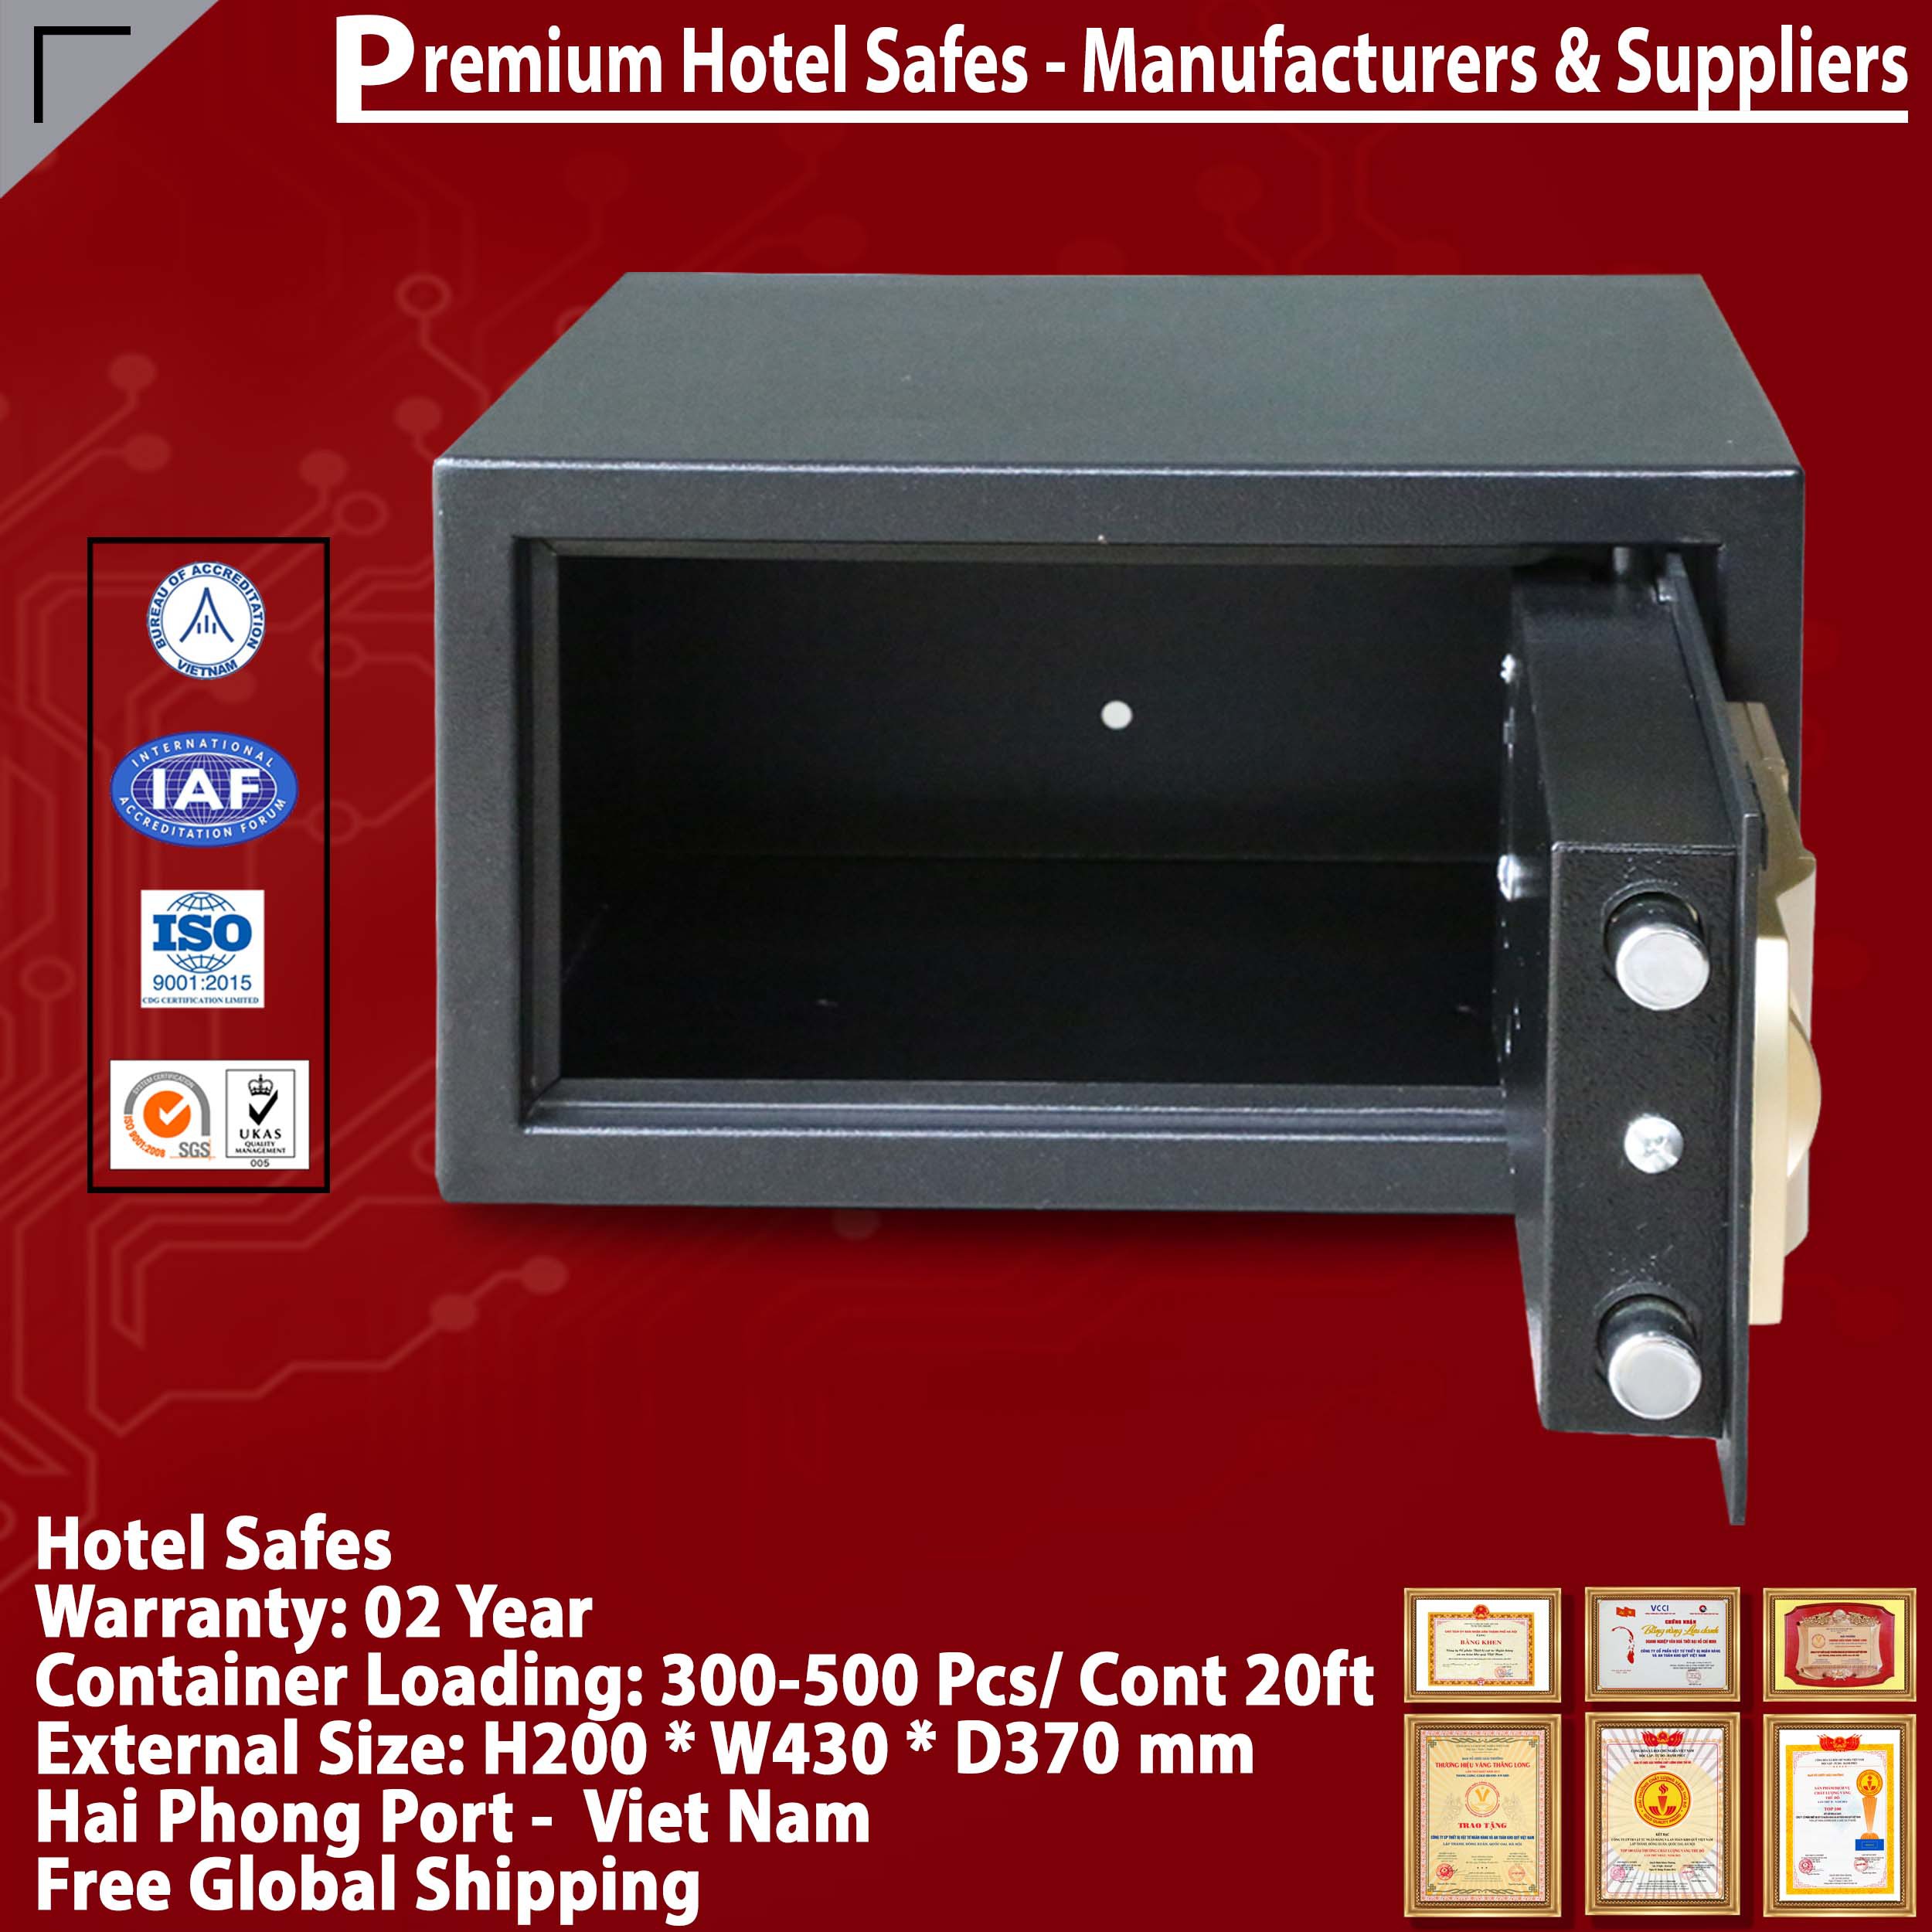 Best Sellers In Hotel Safes Made In Viet Nam Factory